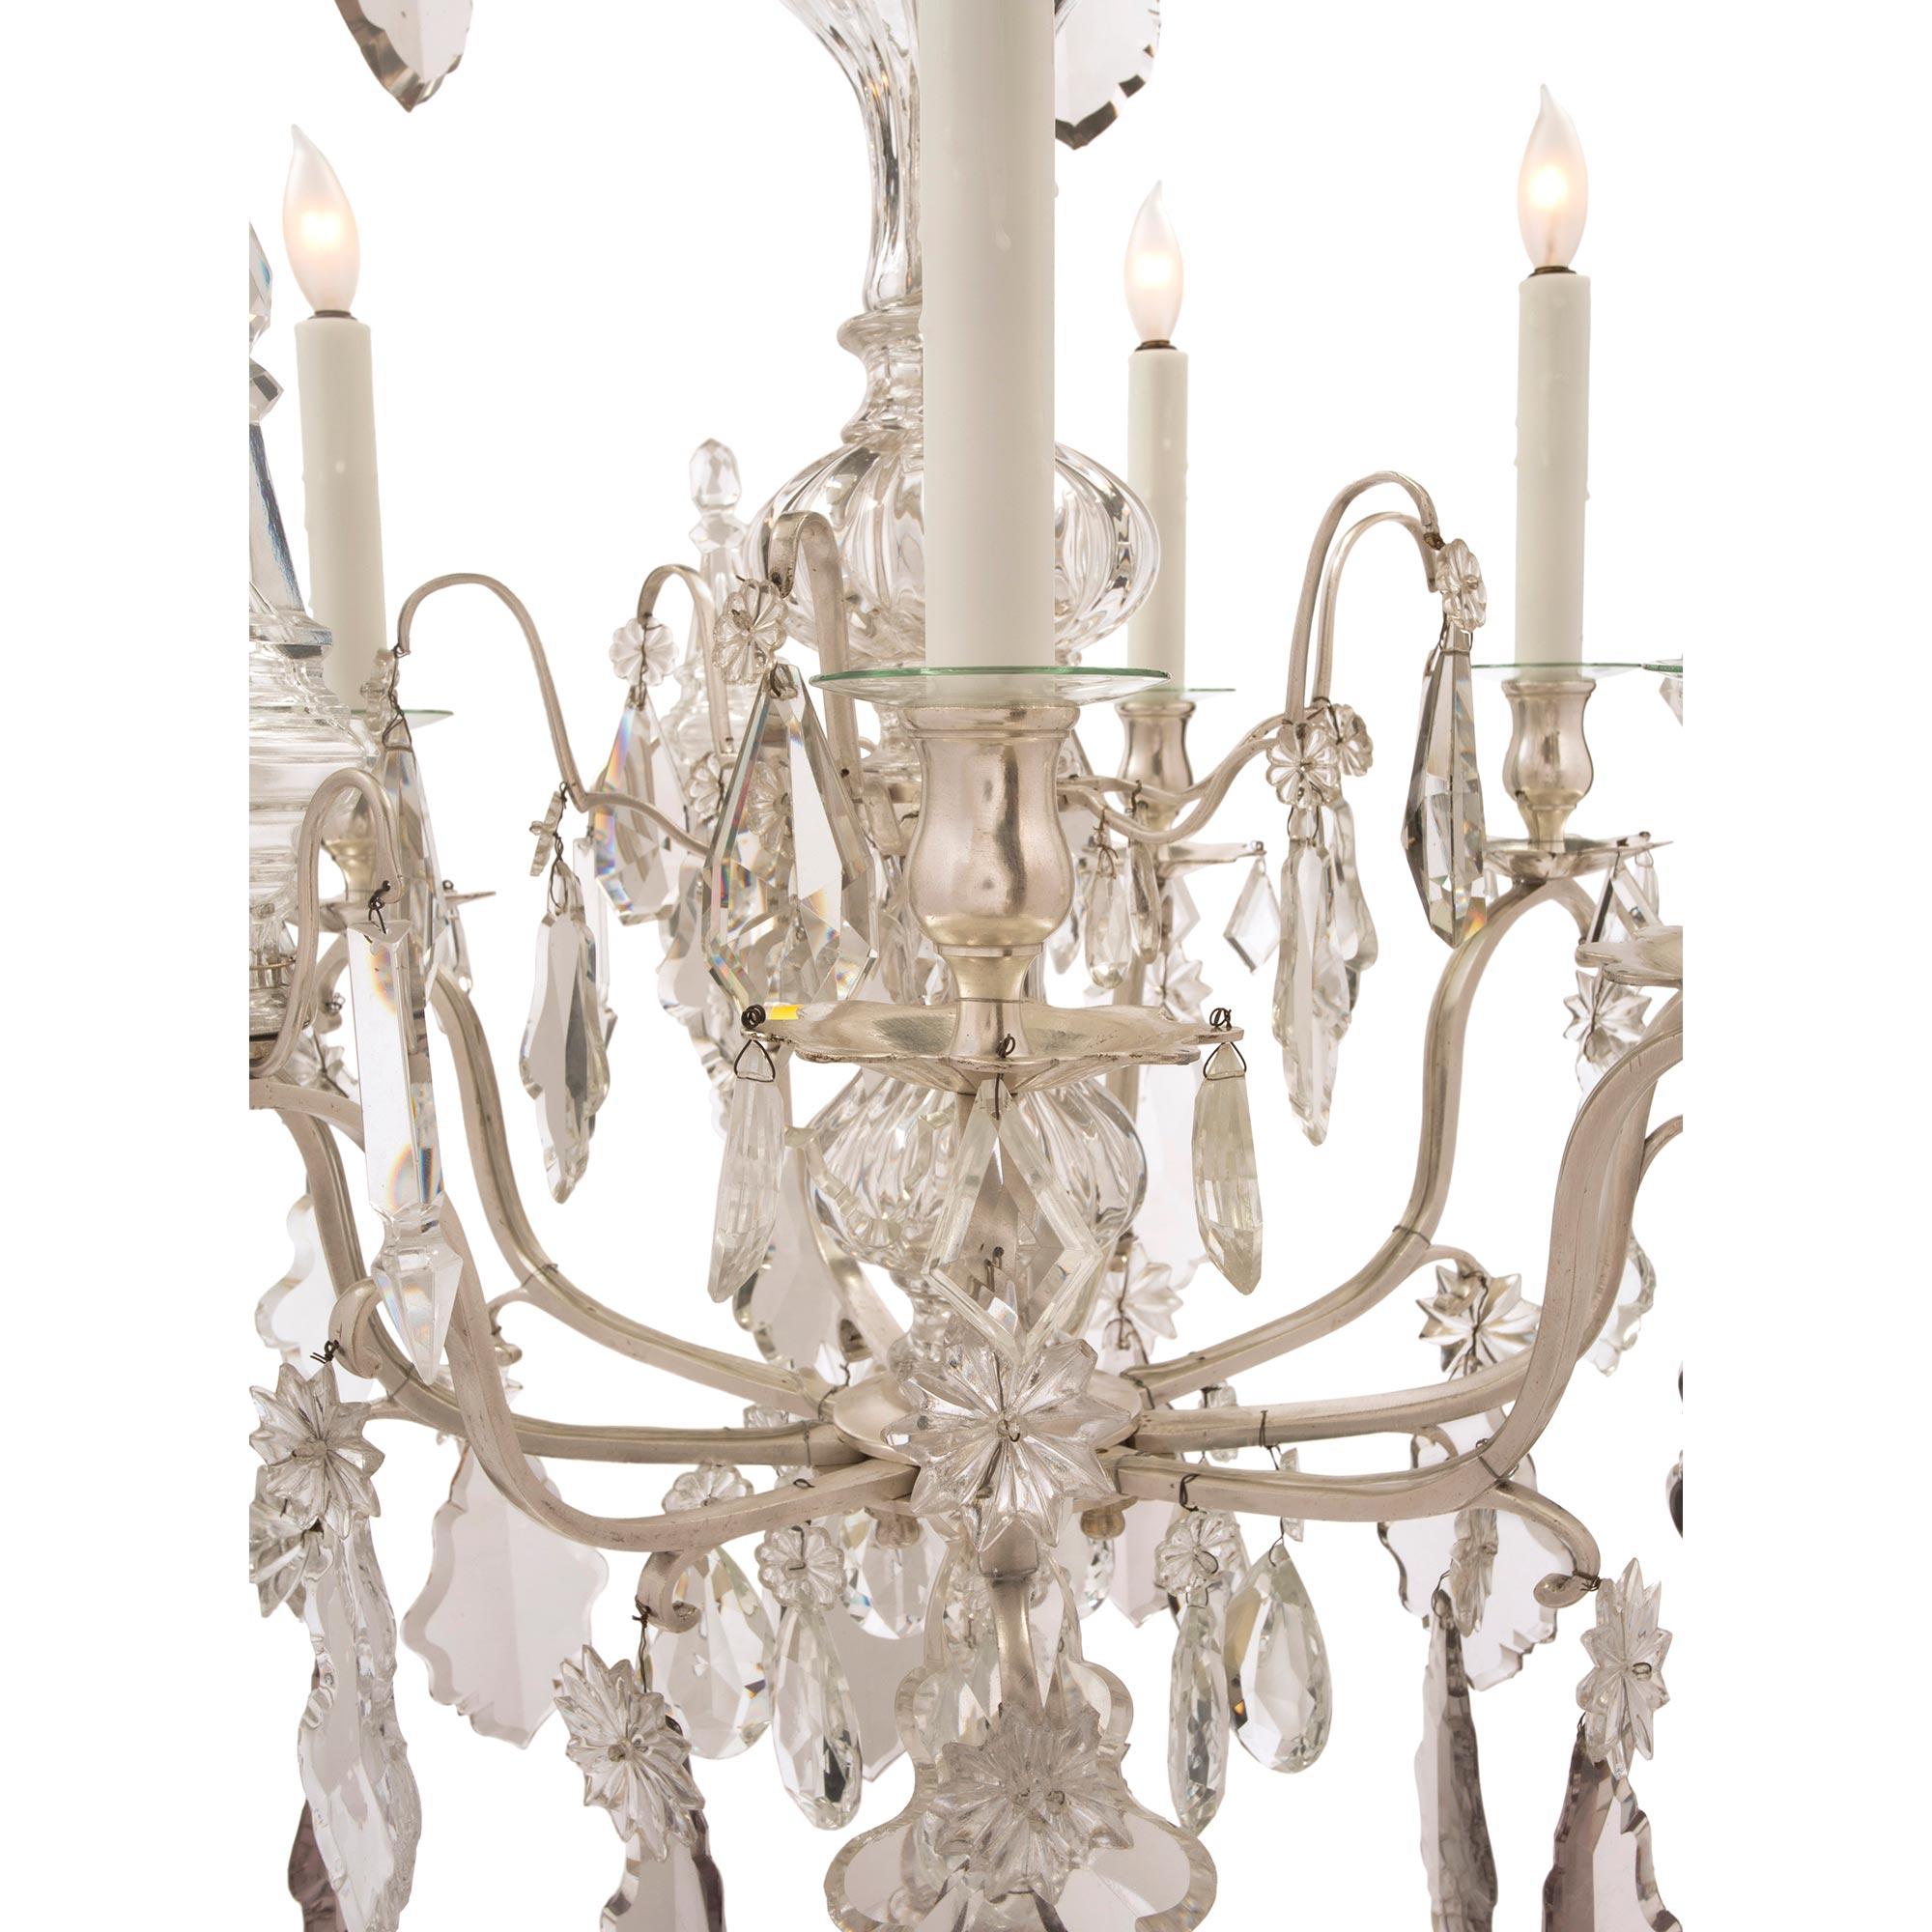 French Mid-19th Century Louis XV Style Bronze and Baccarat Crystal Chandelier For Sale 2